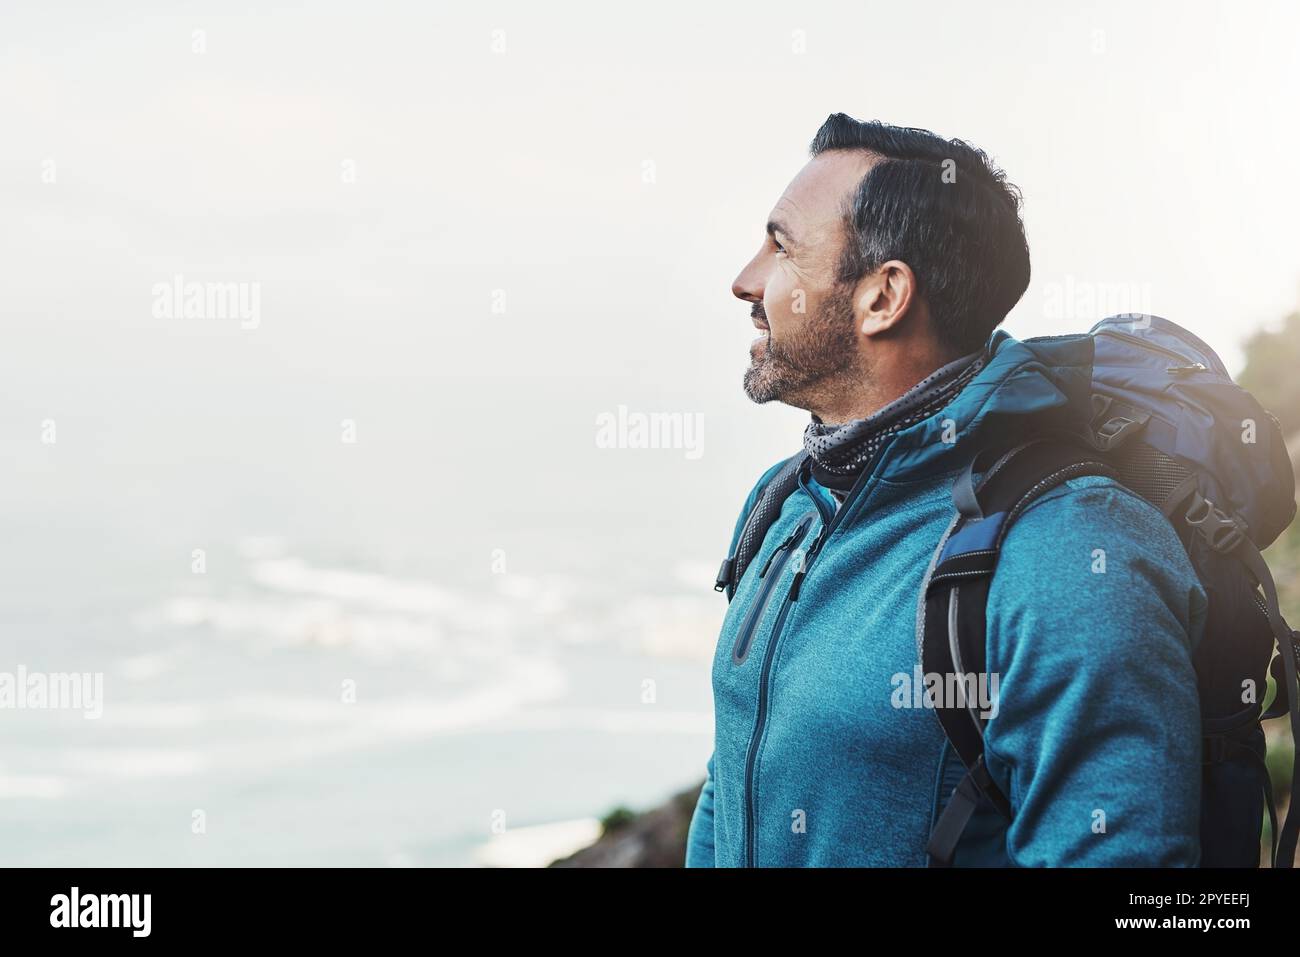 Always be grateful when you reach heights youve never imagined. a middle aged man looking at the view on top of a mountain. Stock Photo